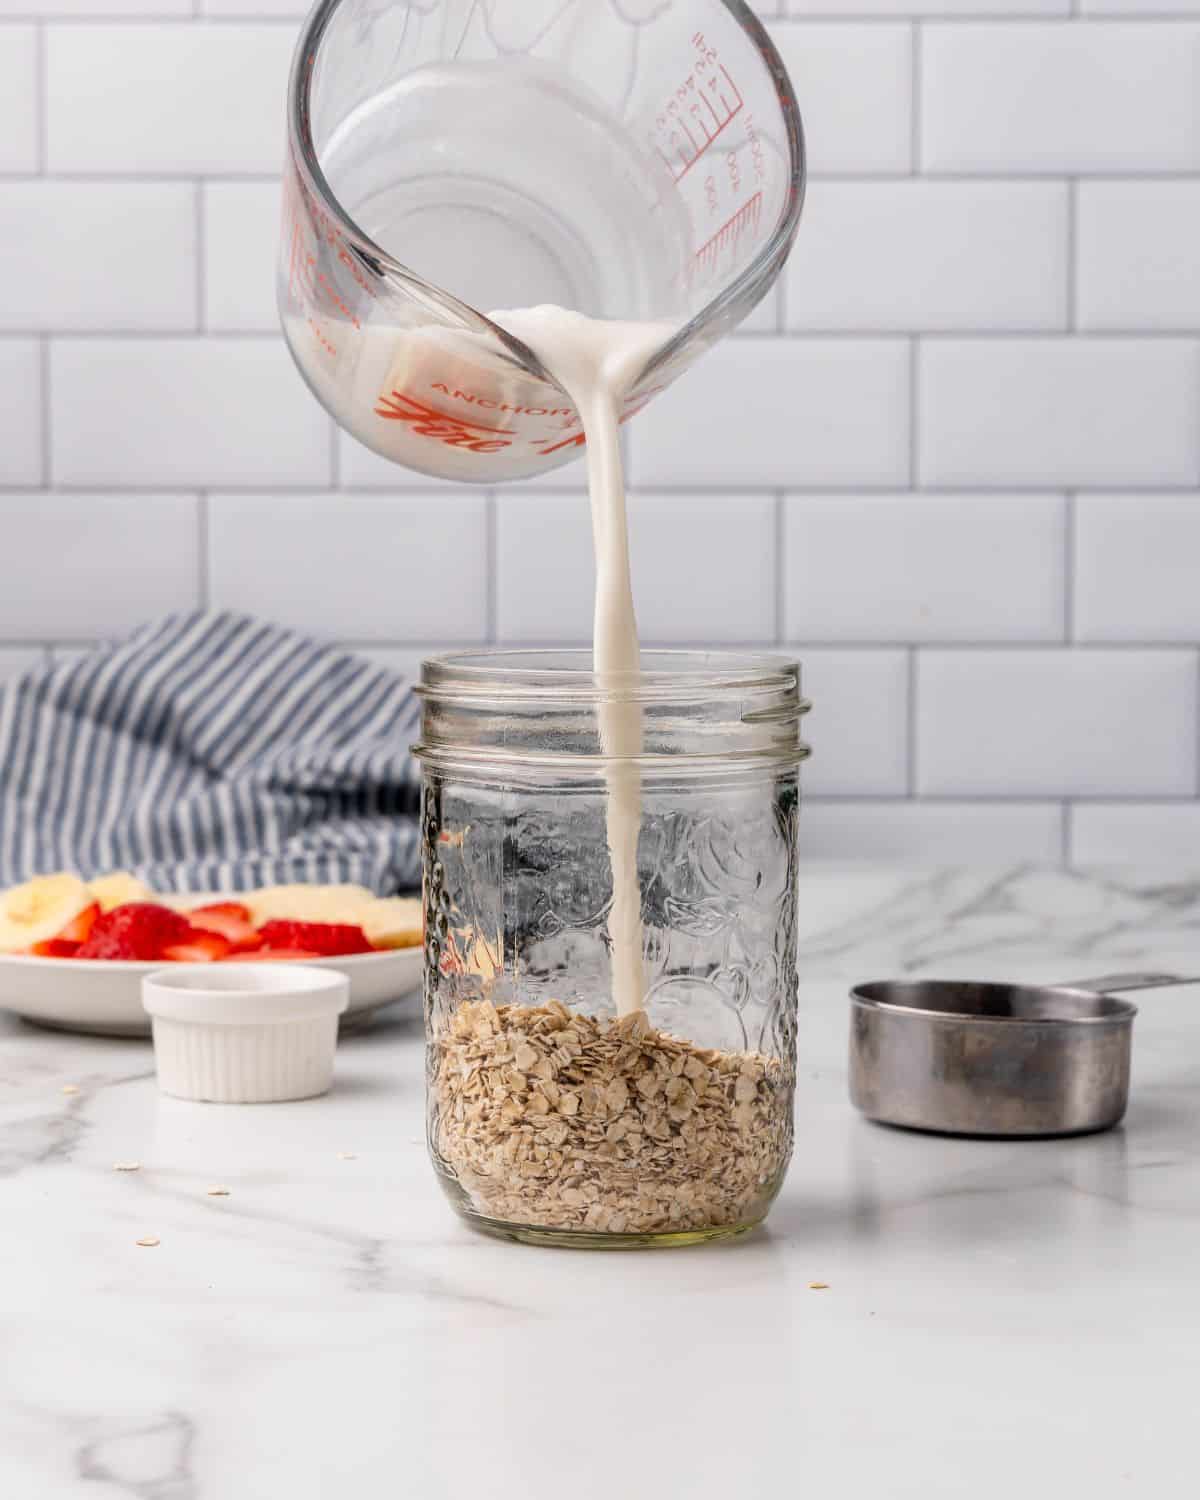 Overnight Oats Containers with Lids and Spoon, 1 Pack Mason Jars for Overnight  Oats, 600 ml Overnight Oats Jars Glass Oatmeal Container to Go for Chia  Pudding Yogurt Salad Cereal Meal Prep